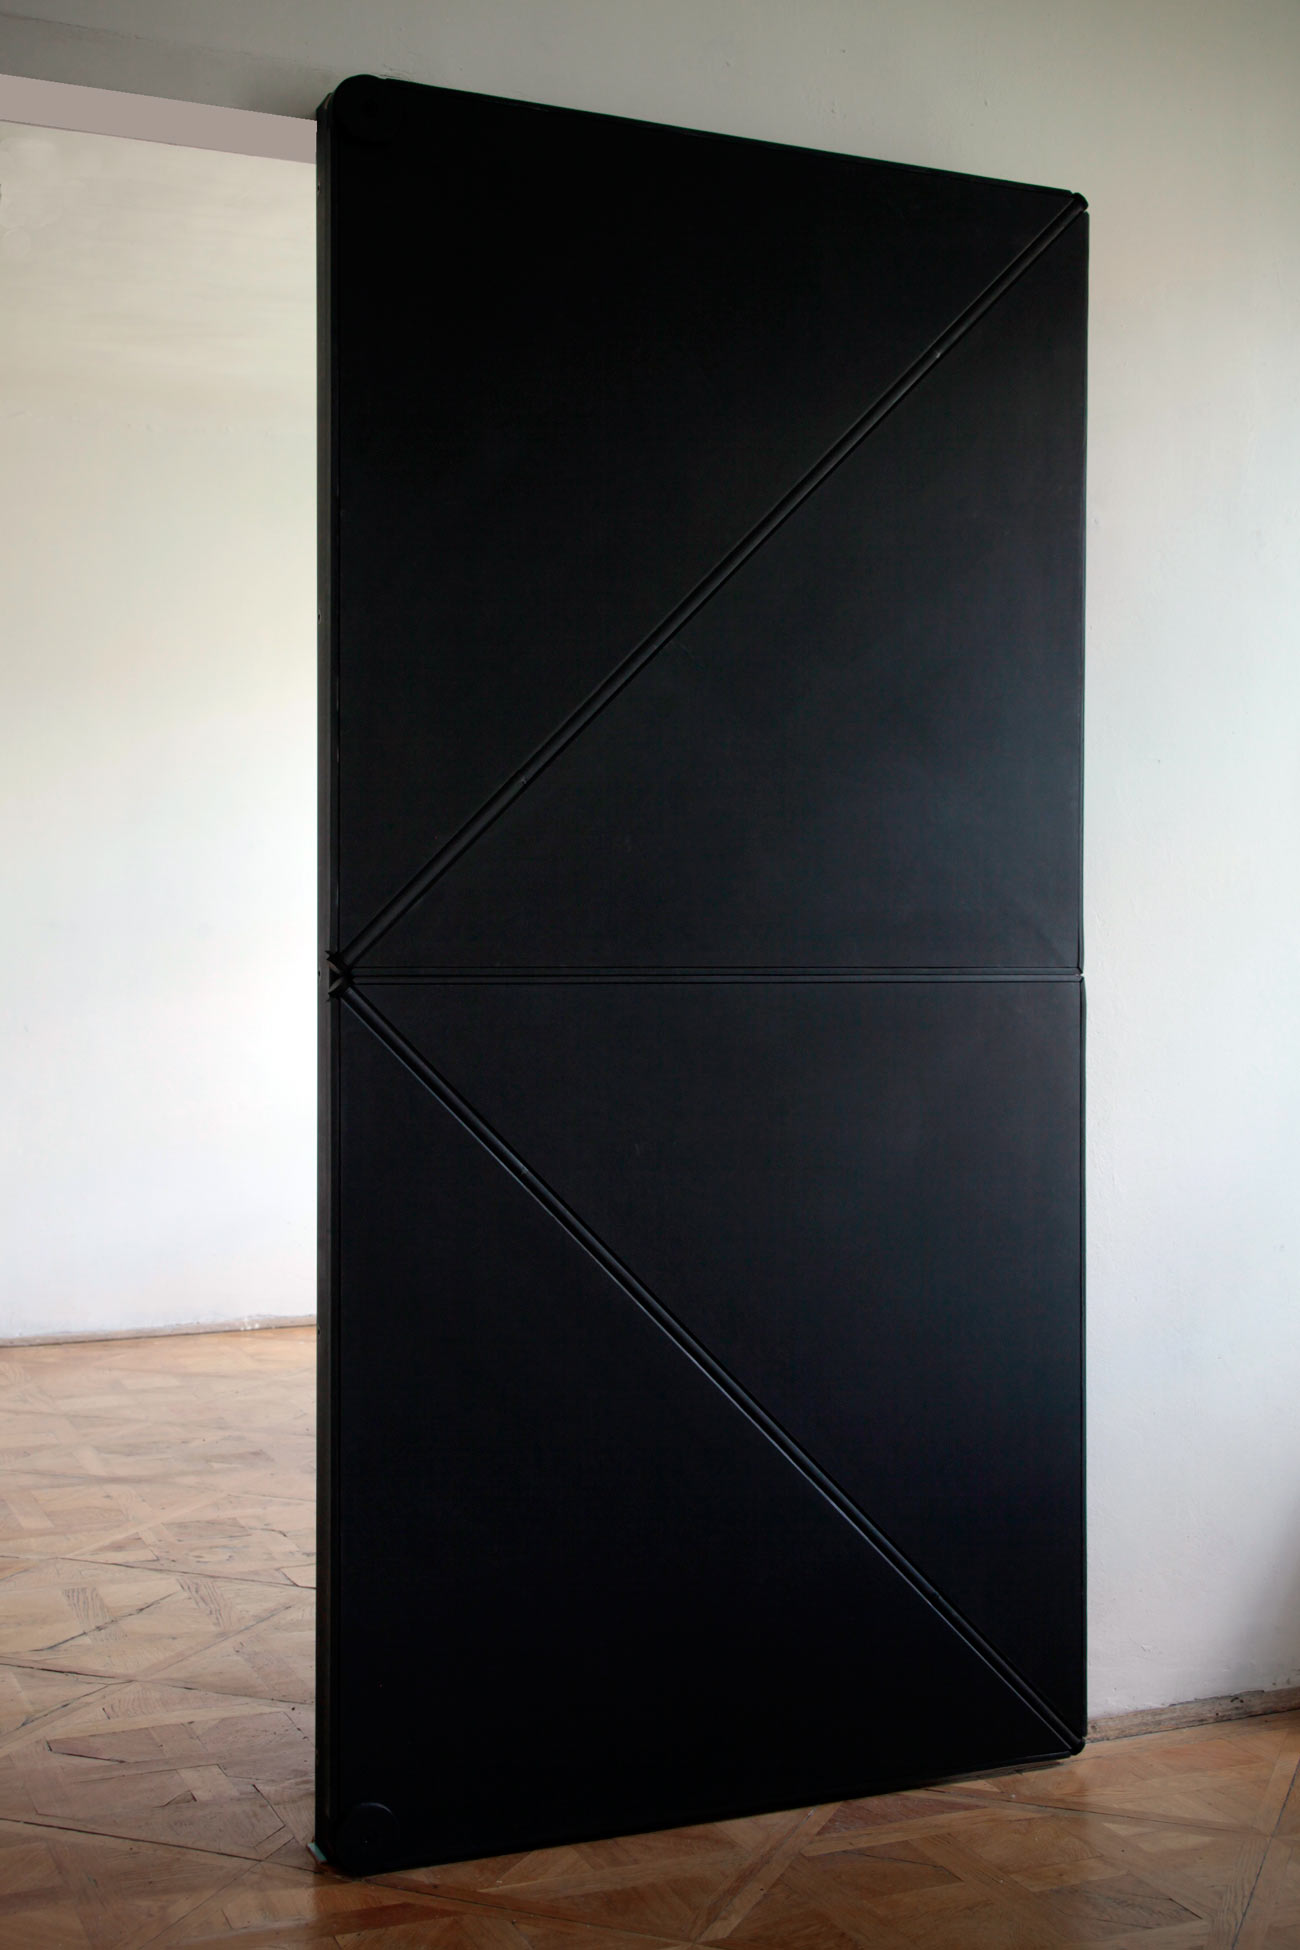 How These Magical, Gravity-Defying Doors Actually Work